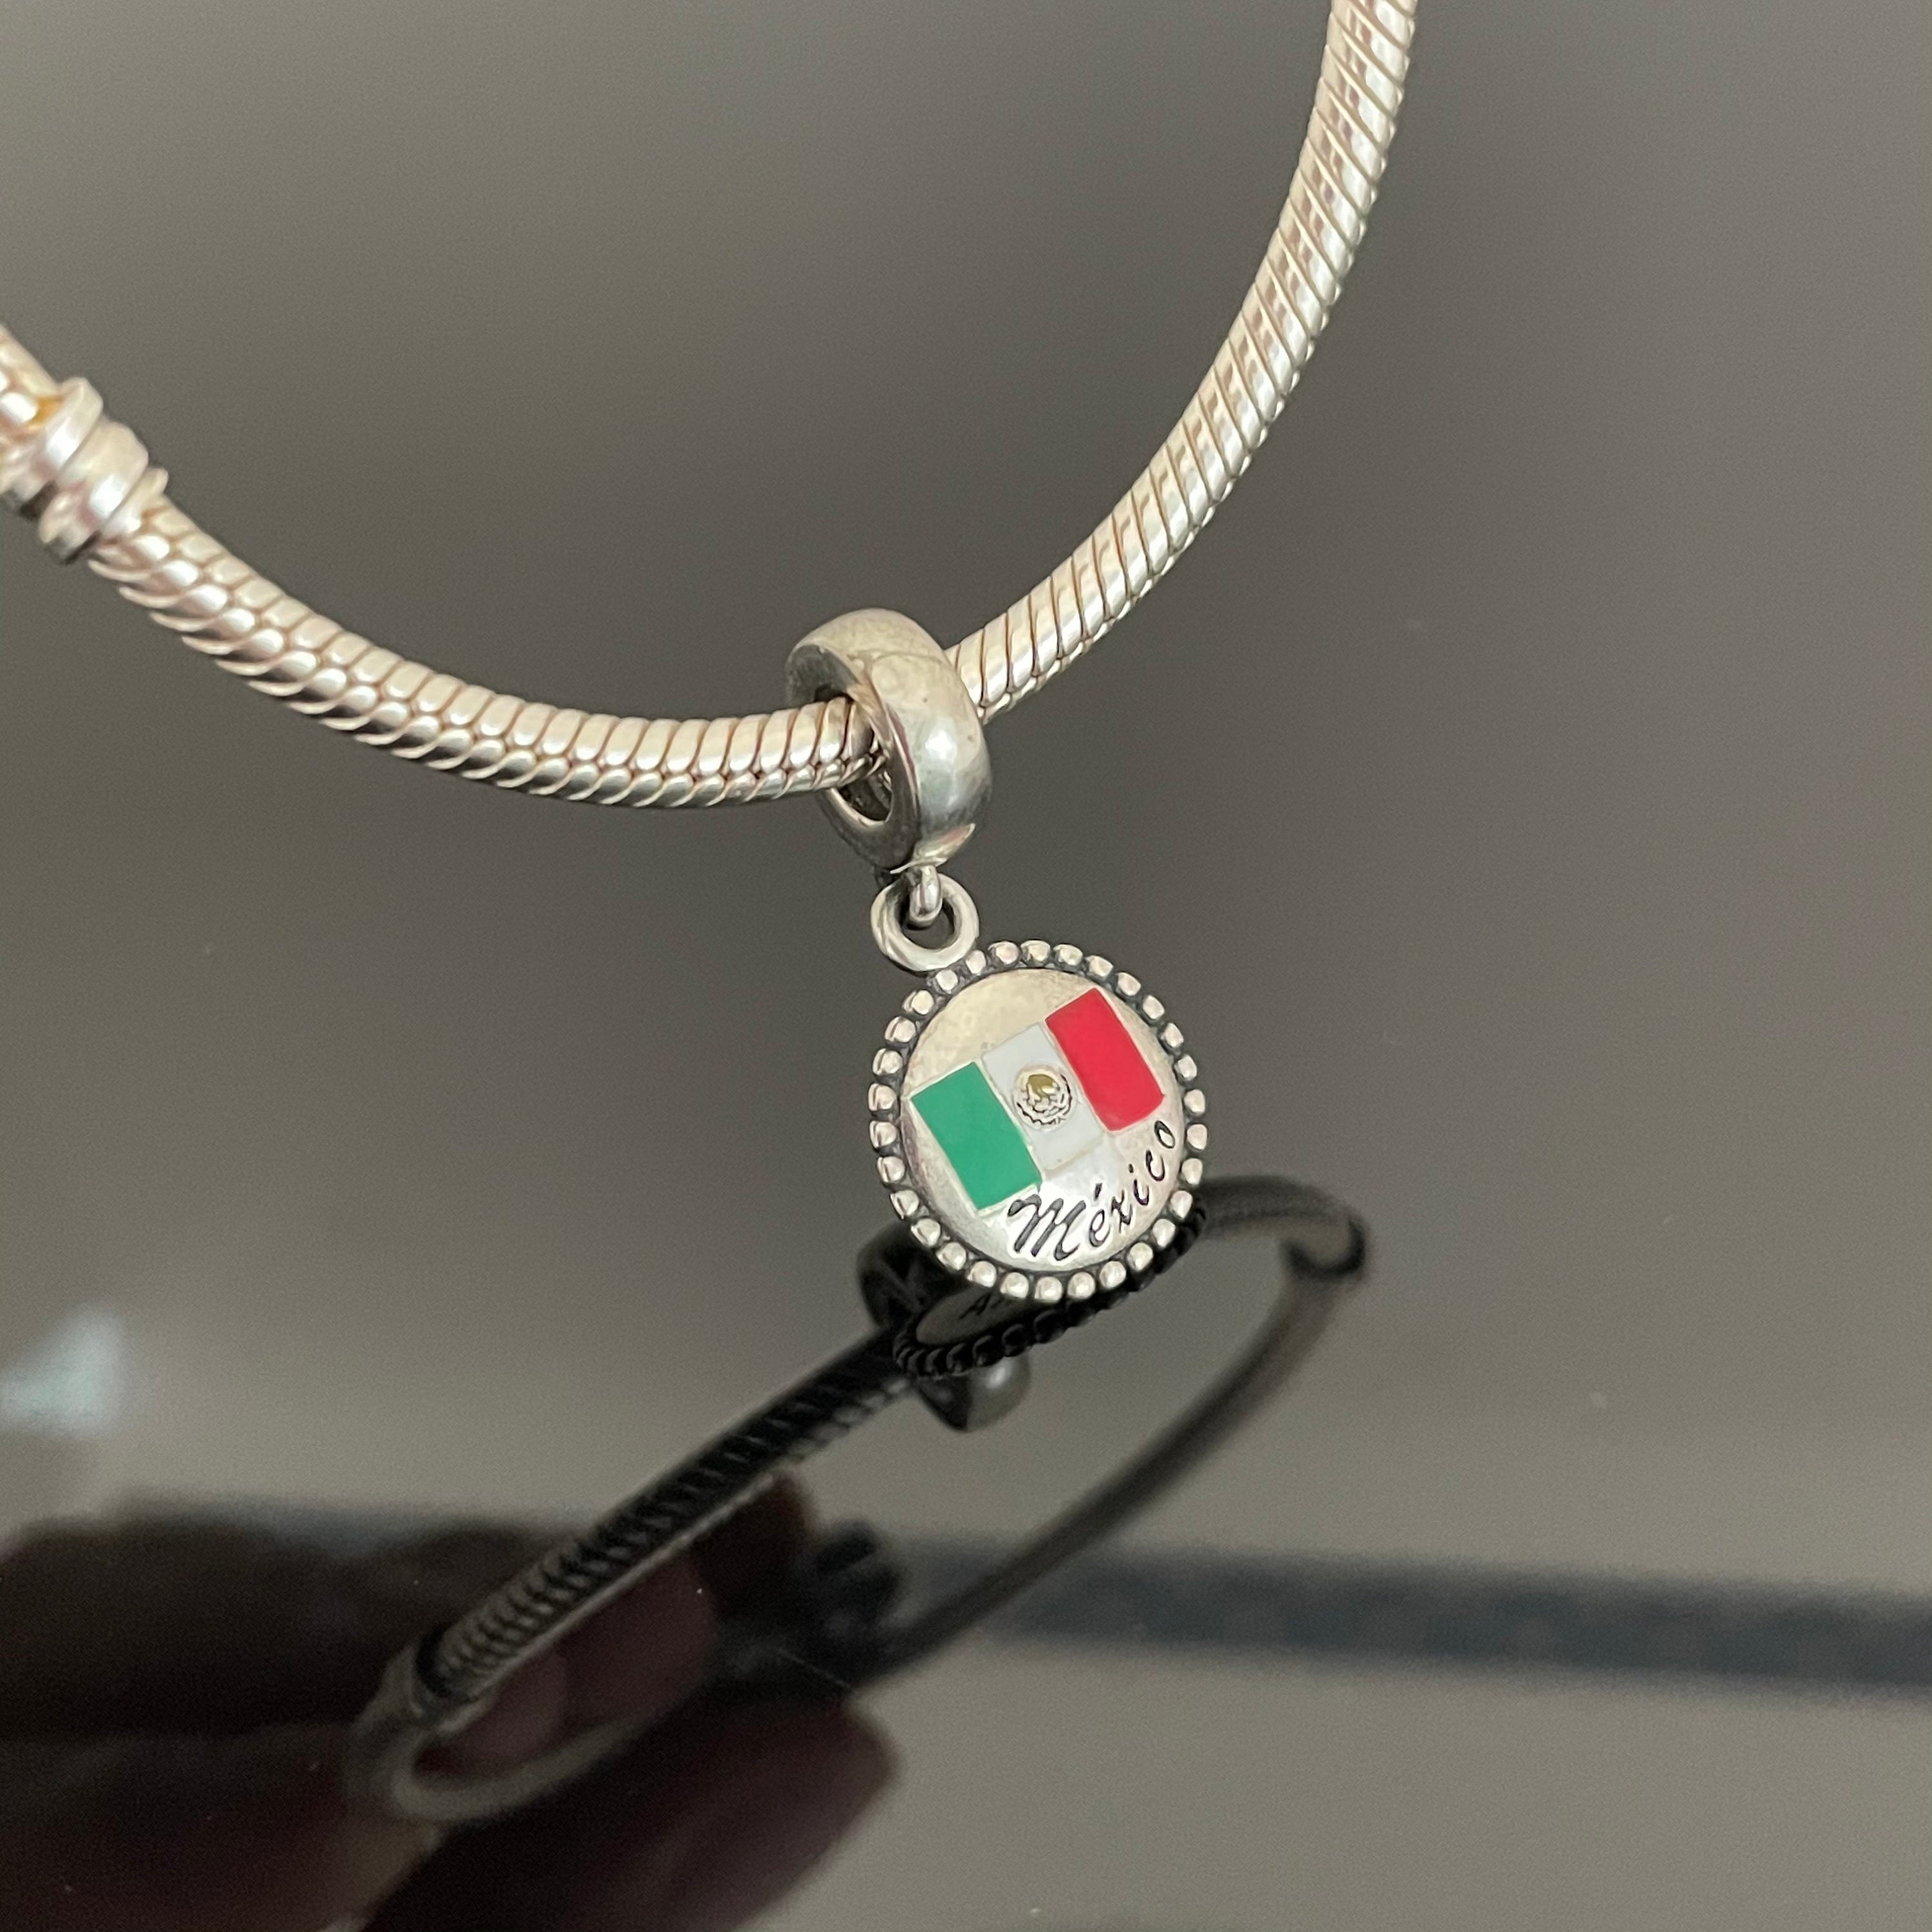 Mootael Mexico Mexican Flag Heart Beads for Bracelets Jewelry Making Silver Charms for Bracelets for Women Gifts Jewelry Gift Ideas for Girls Bead